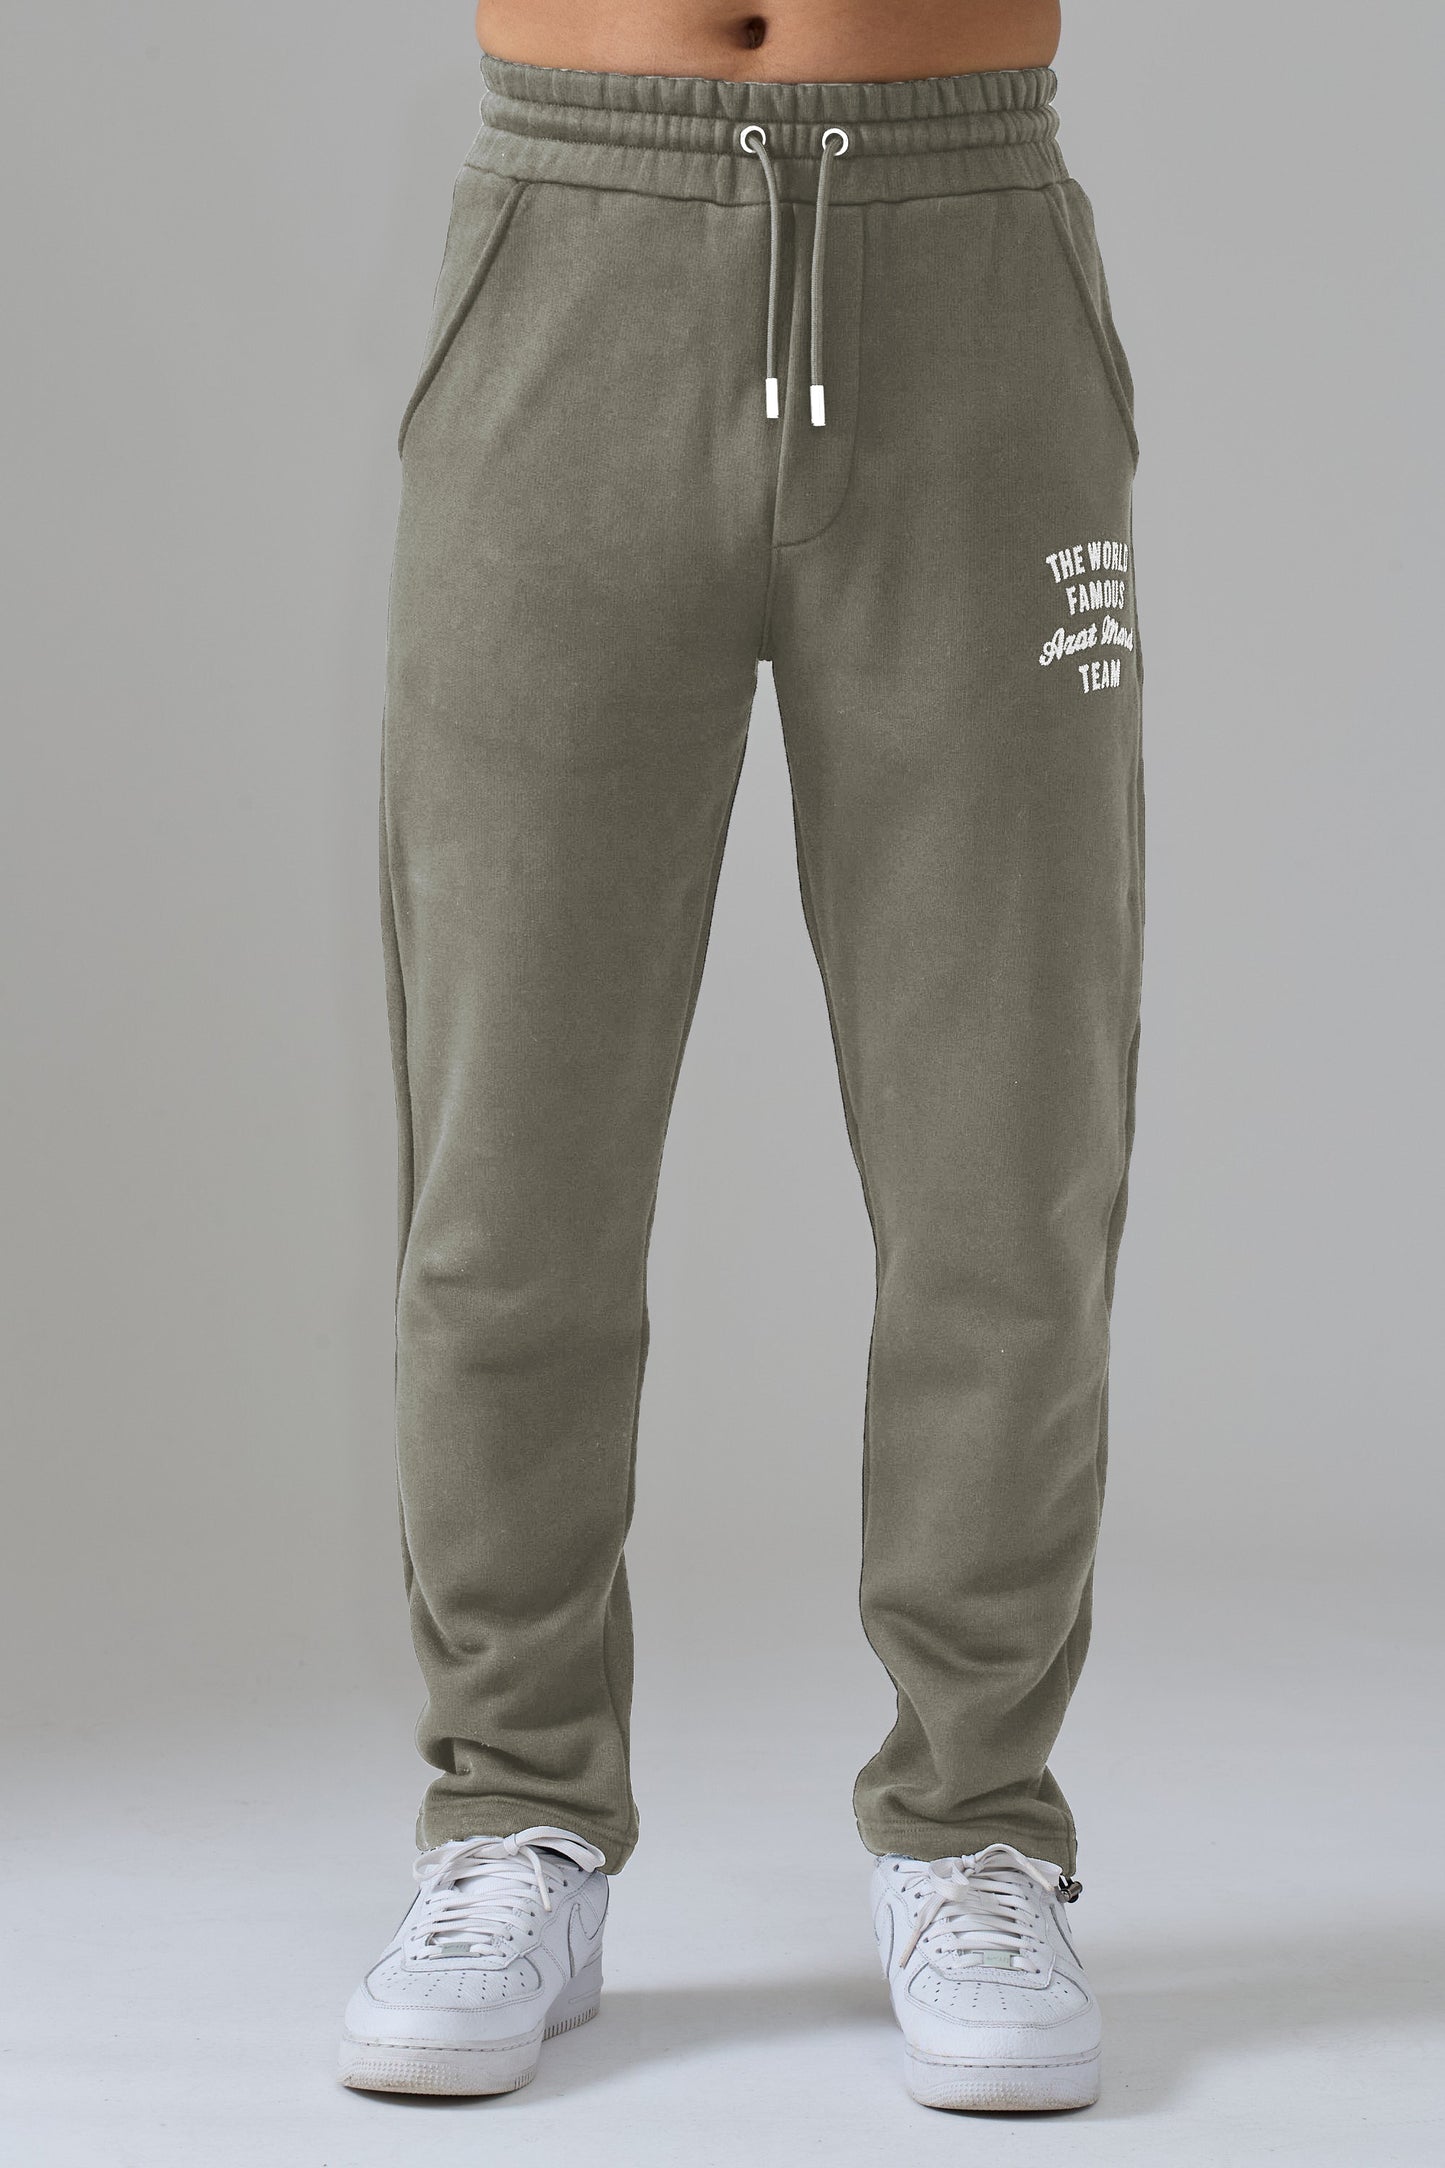 TAUPE WORLD FAMOUS TEAM JOGGING PANTS